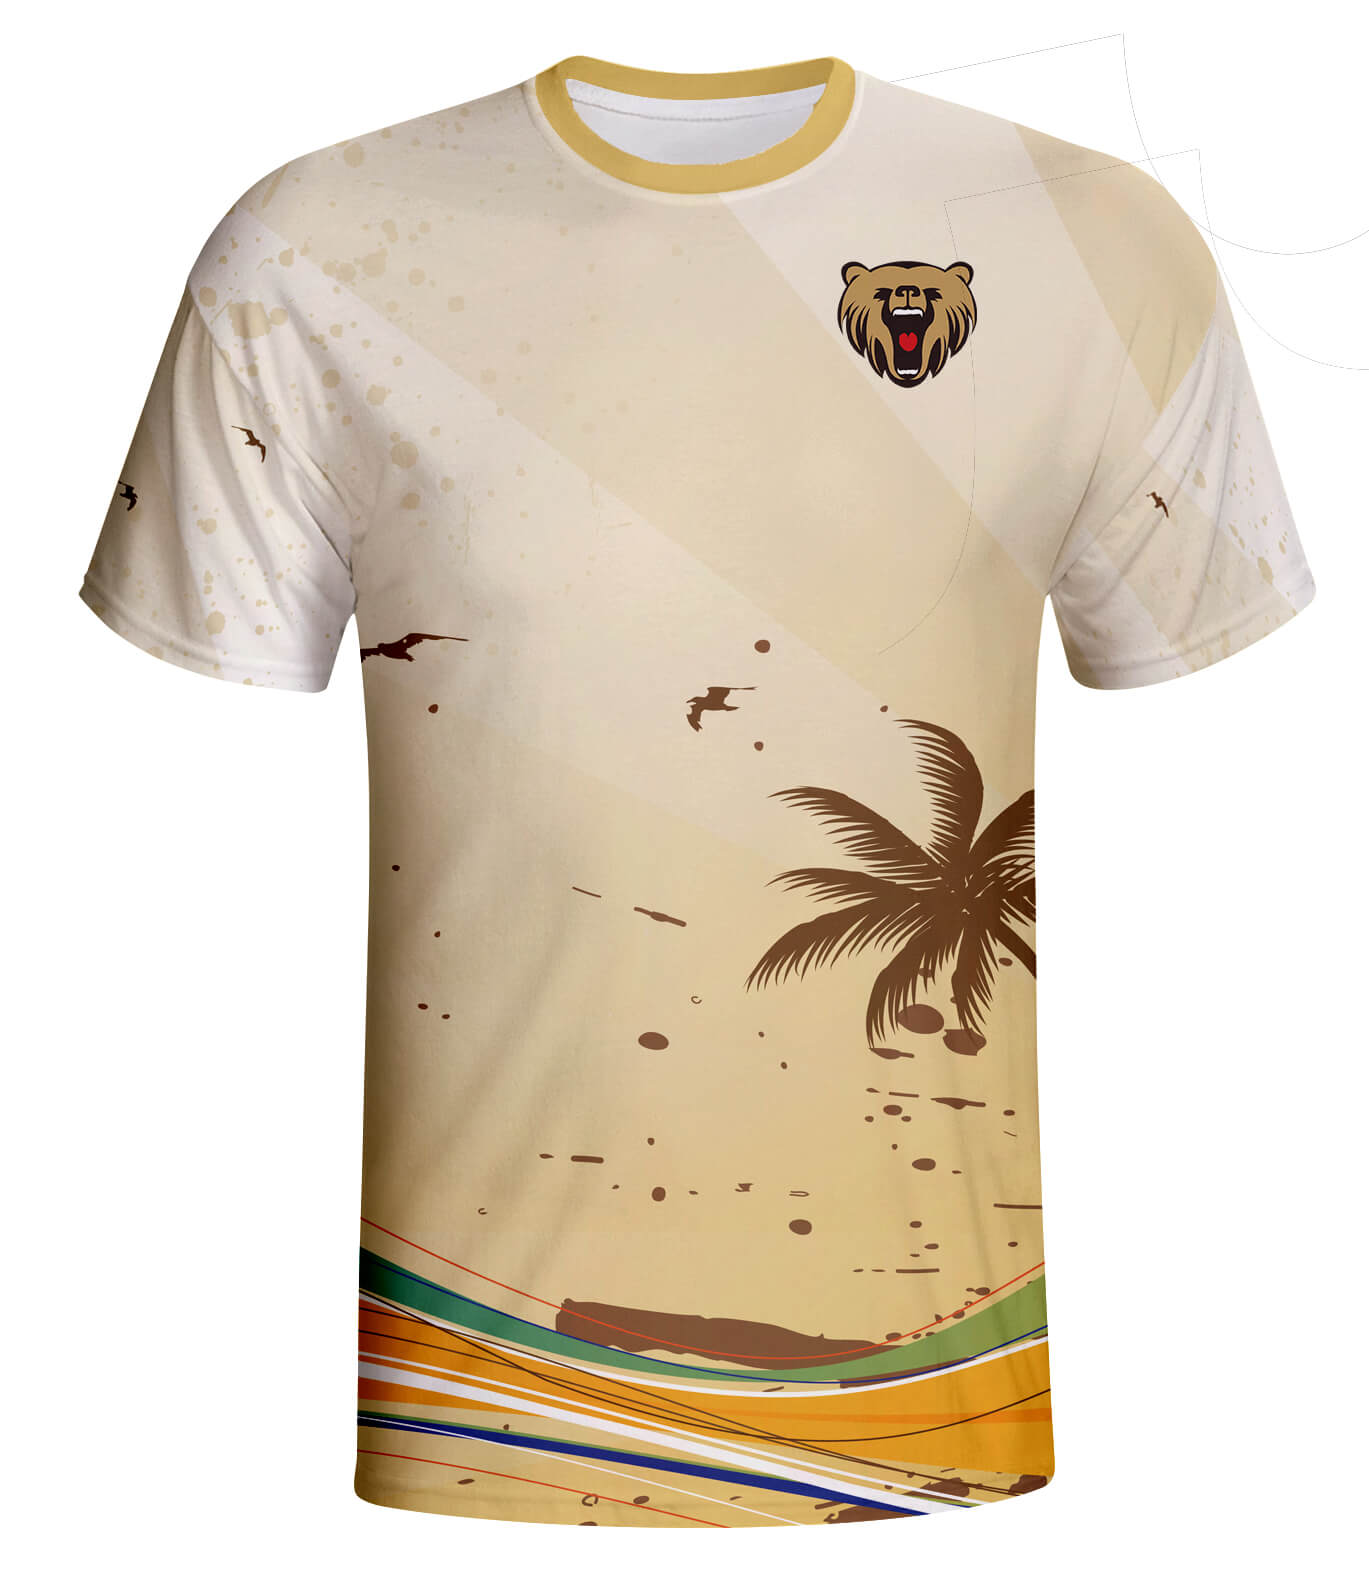 Sublimated 100% Polyester Good Quality Tee Customize Your Color And Patterns You Need